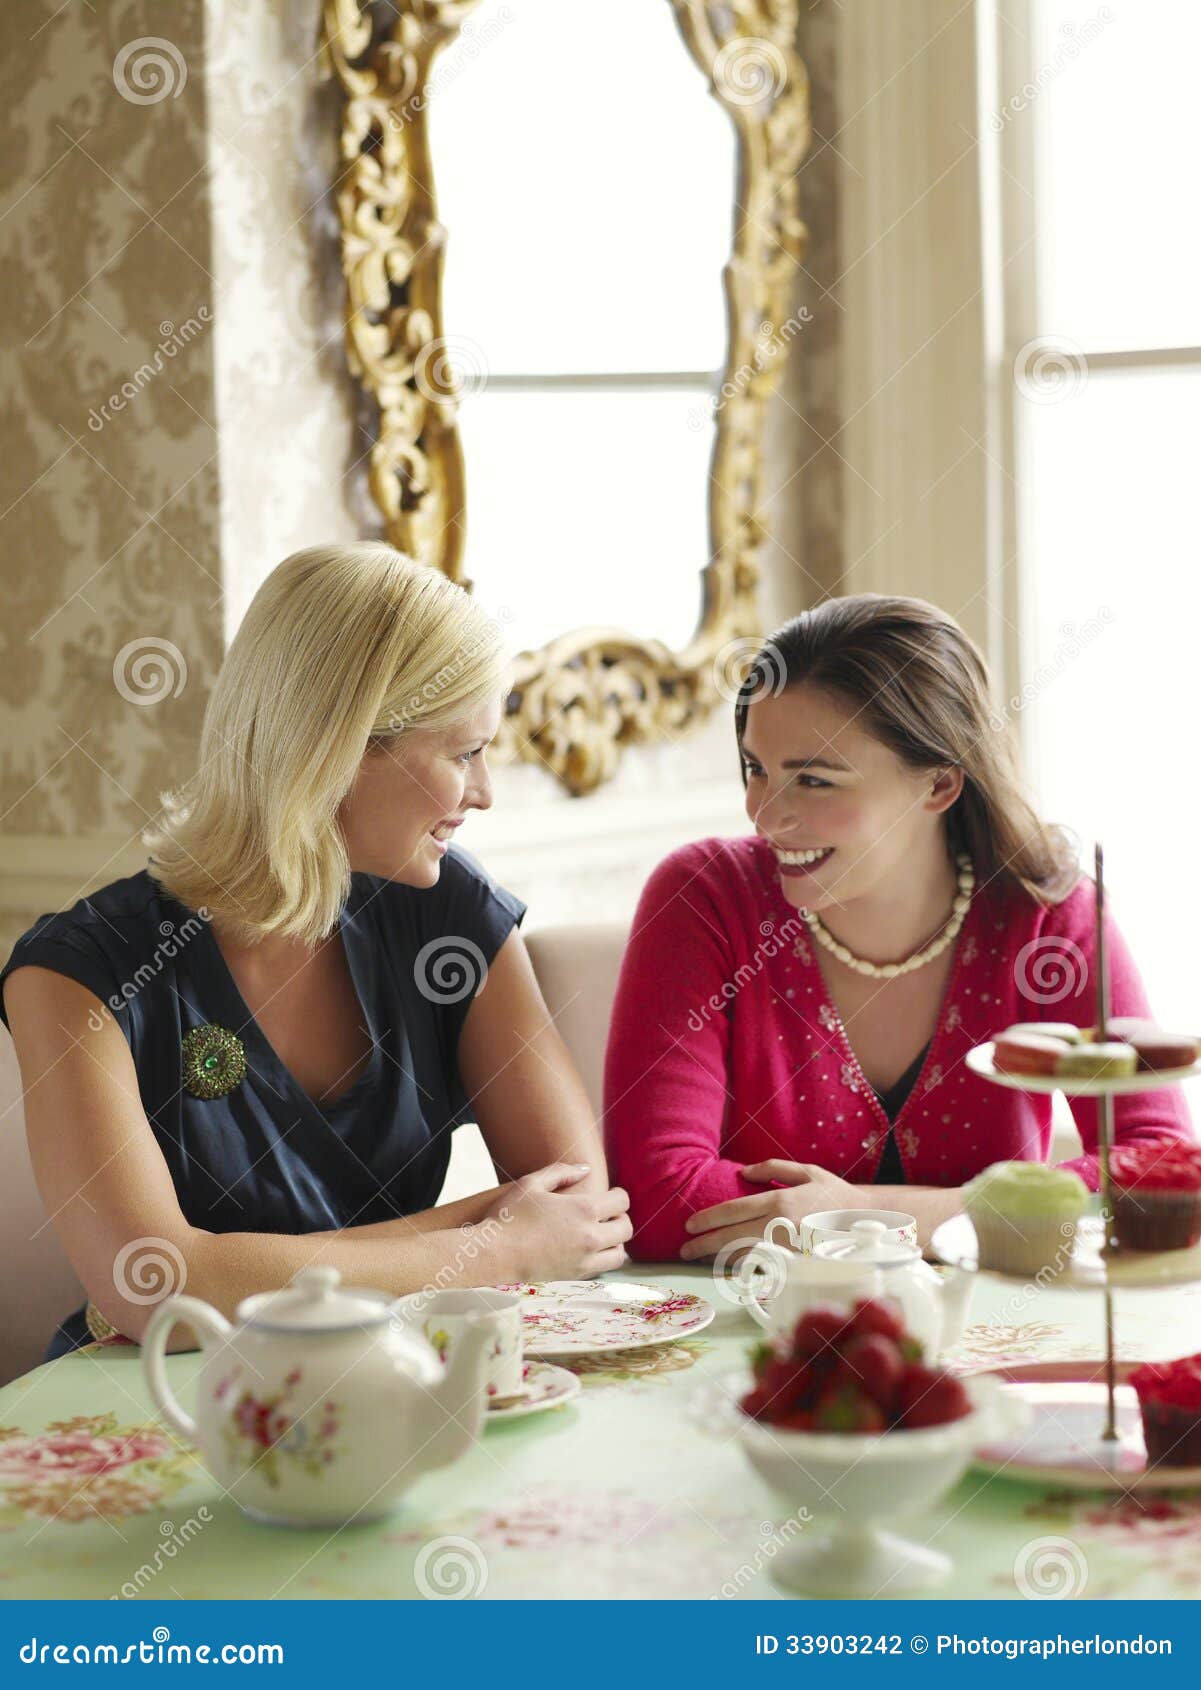 happy women at dining table